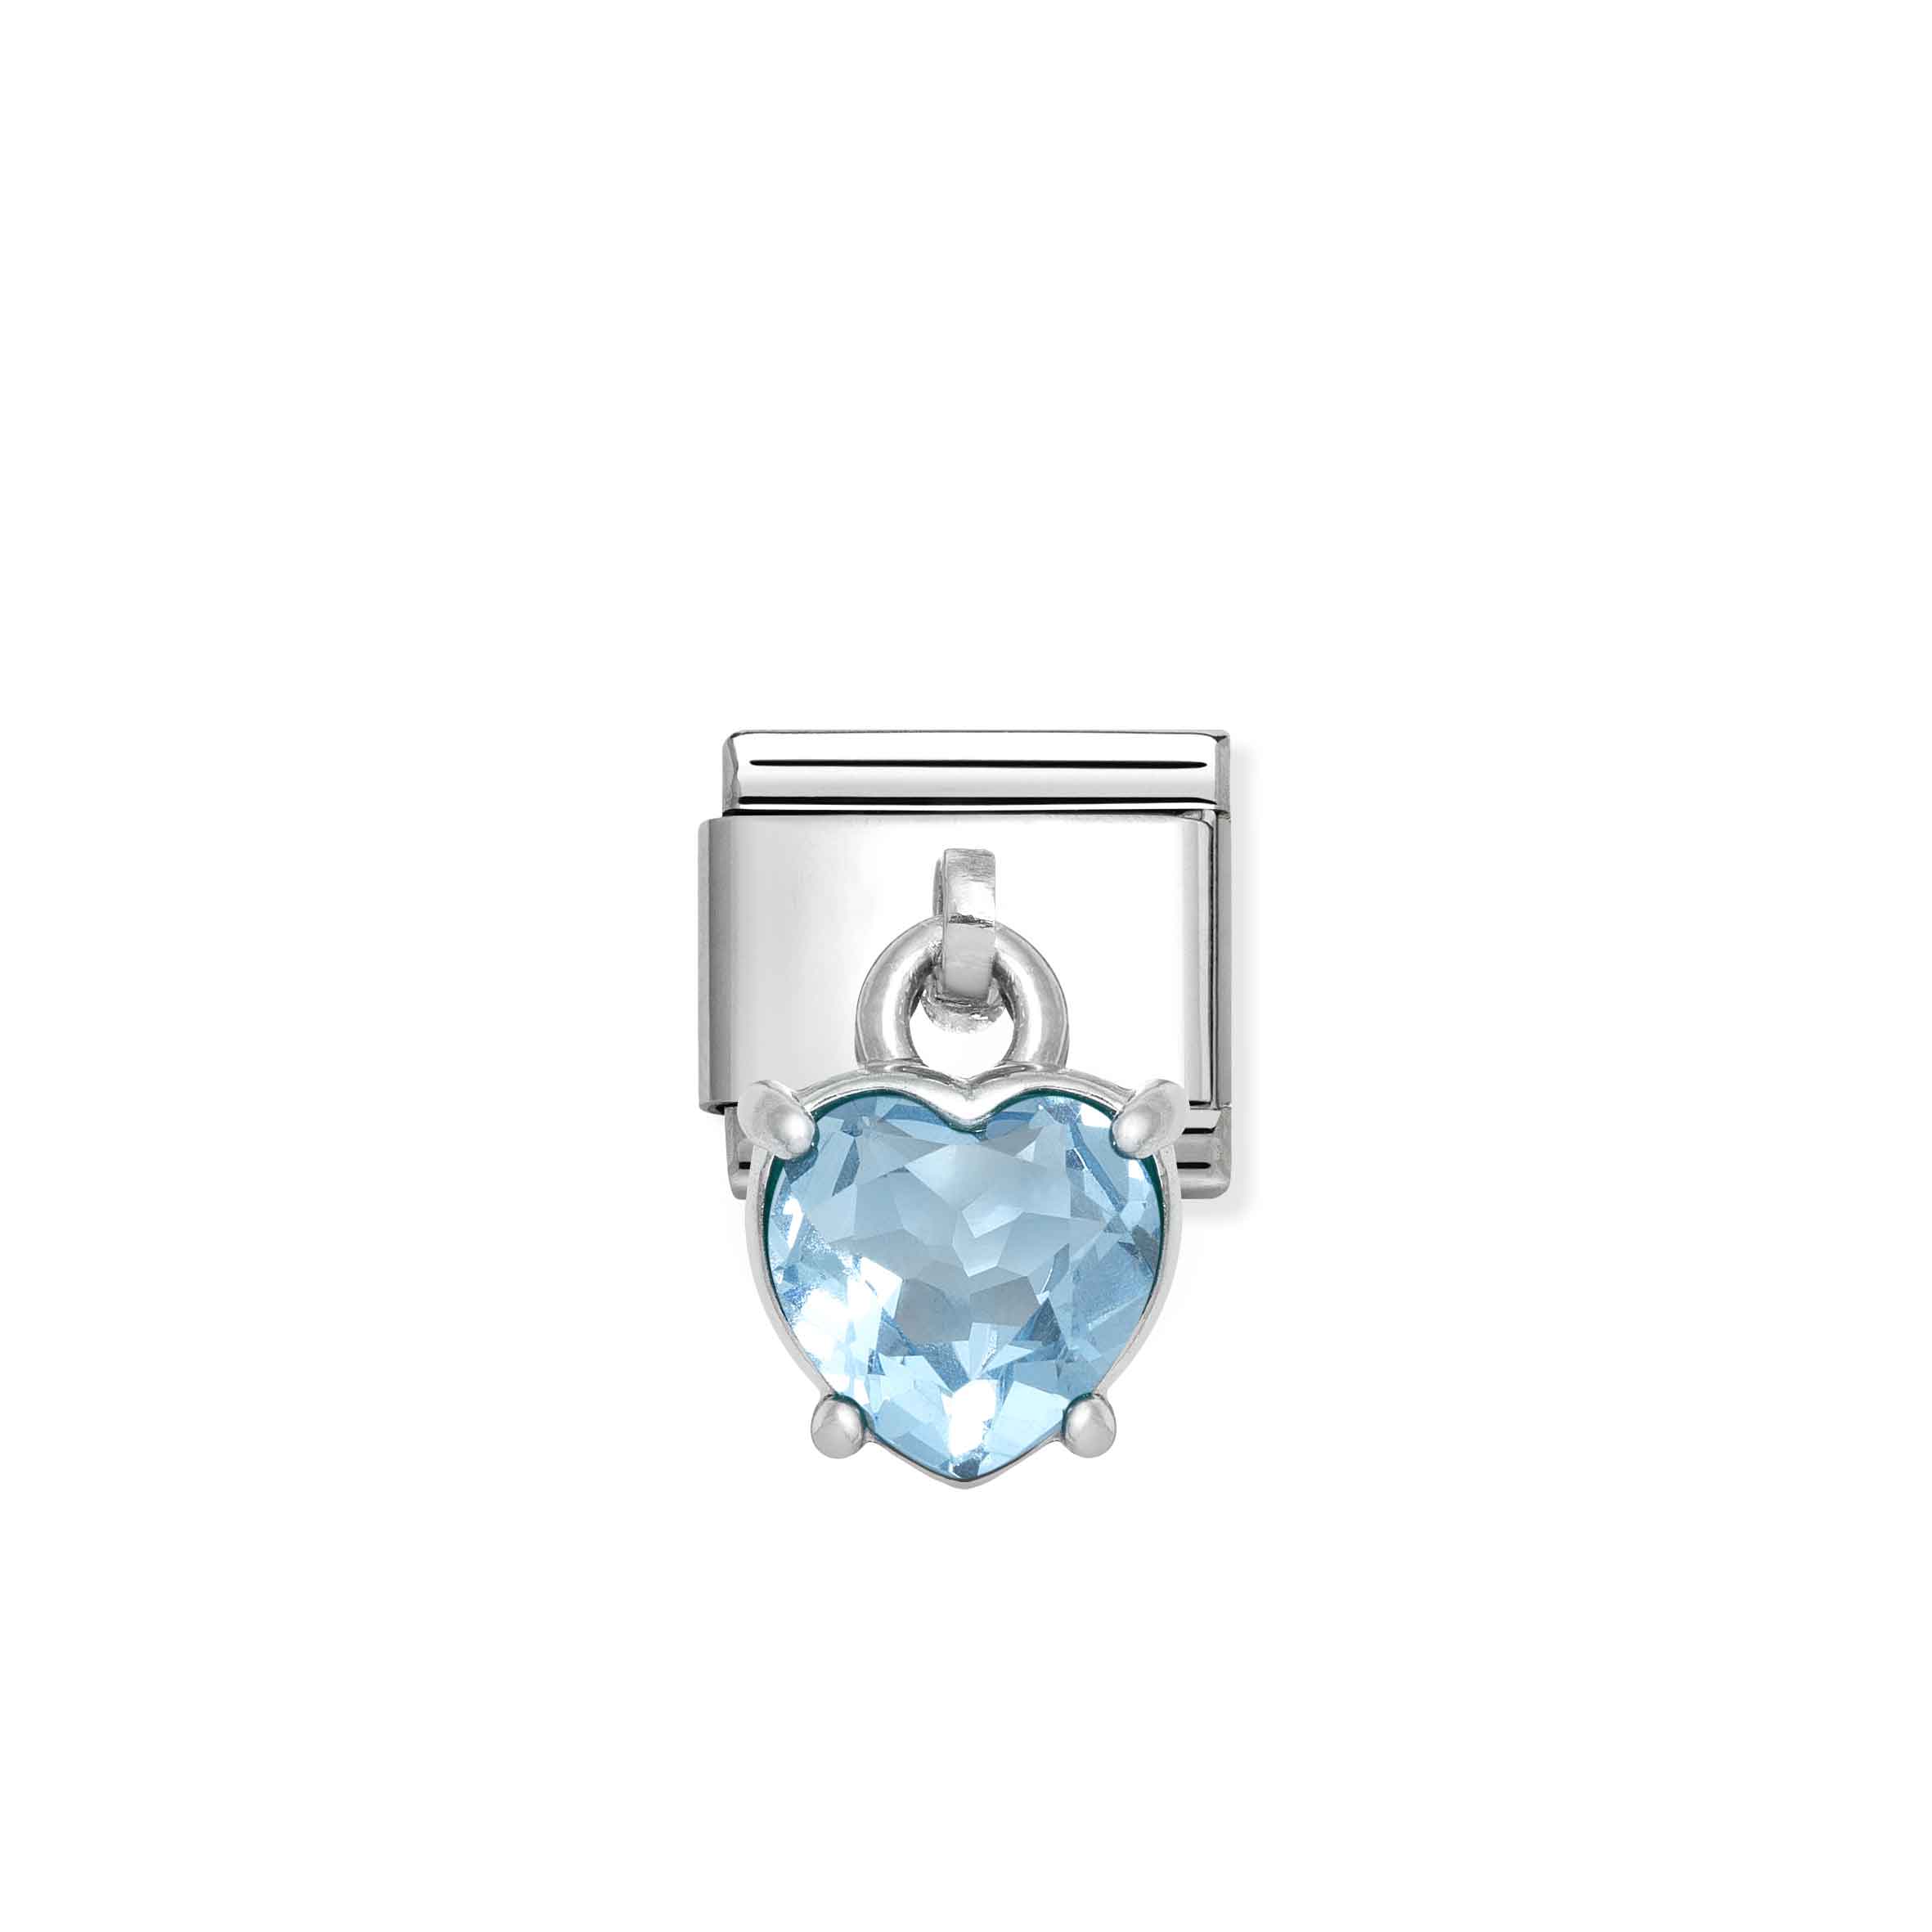 Nomination Silver Hanging Blue CZ Stone Heart Composable Charm